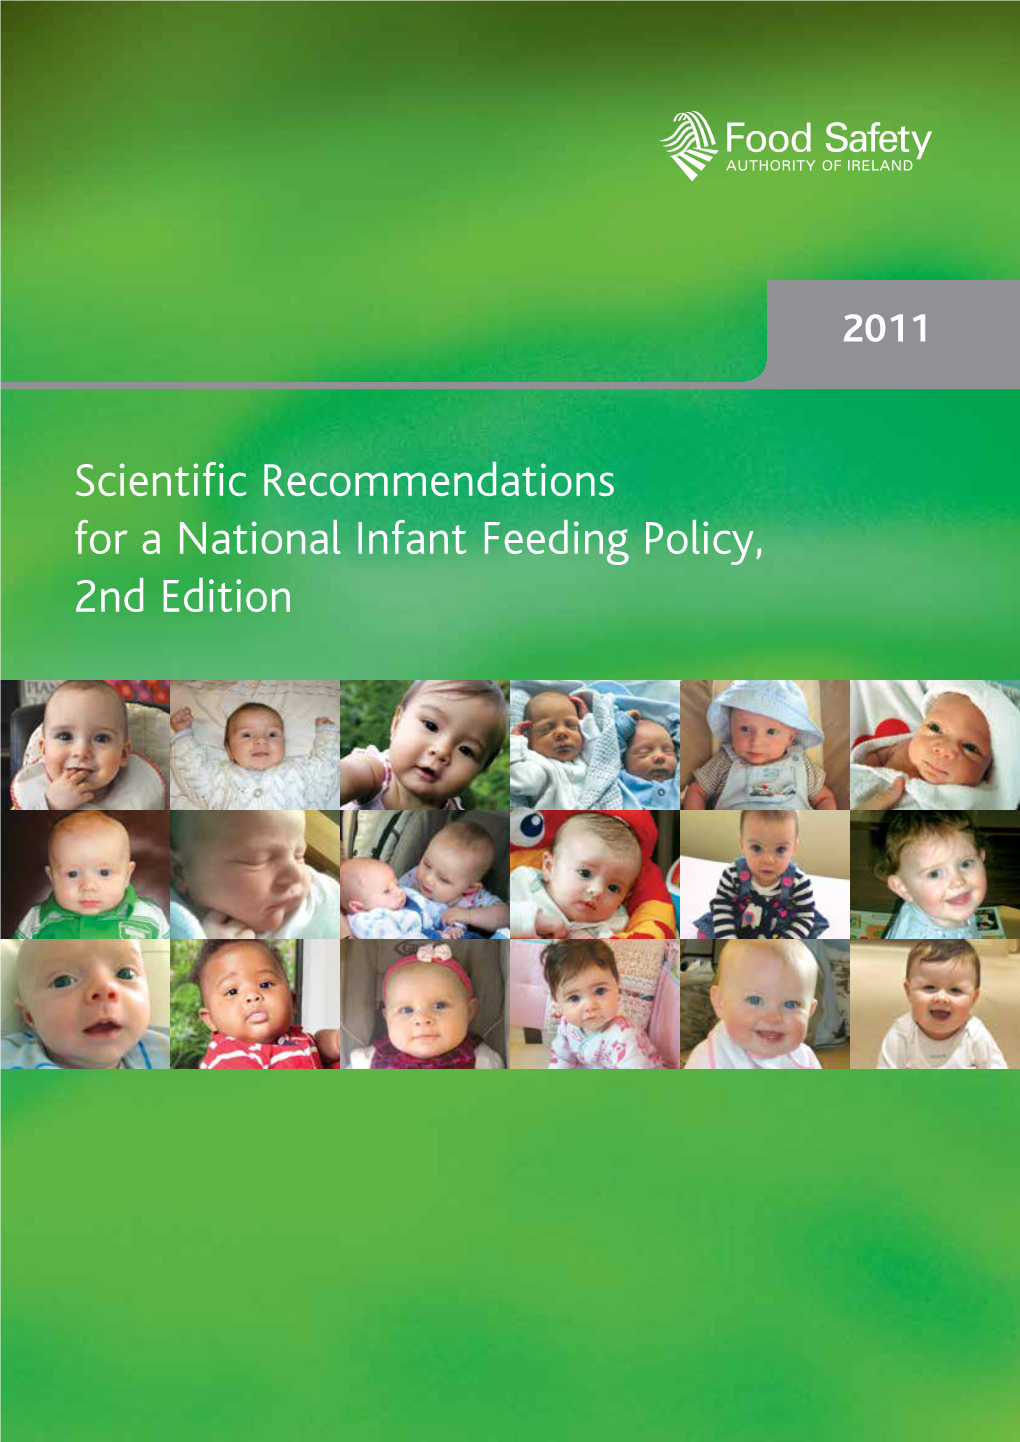 Scientific Recommendations for a National Infant Feeding Policy, 2Nd Edition Scientific Recommendations for a National Infant Feeding Policy, 2Nd Edition